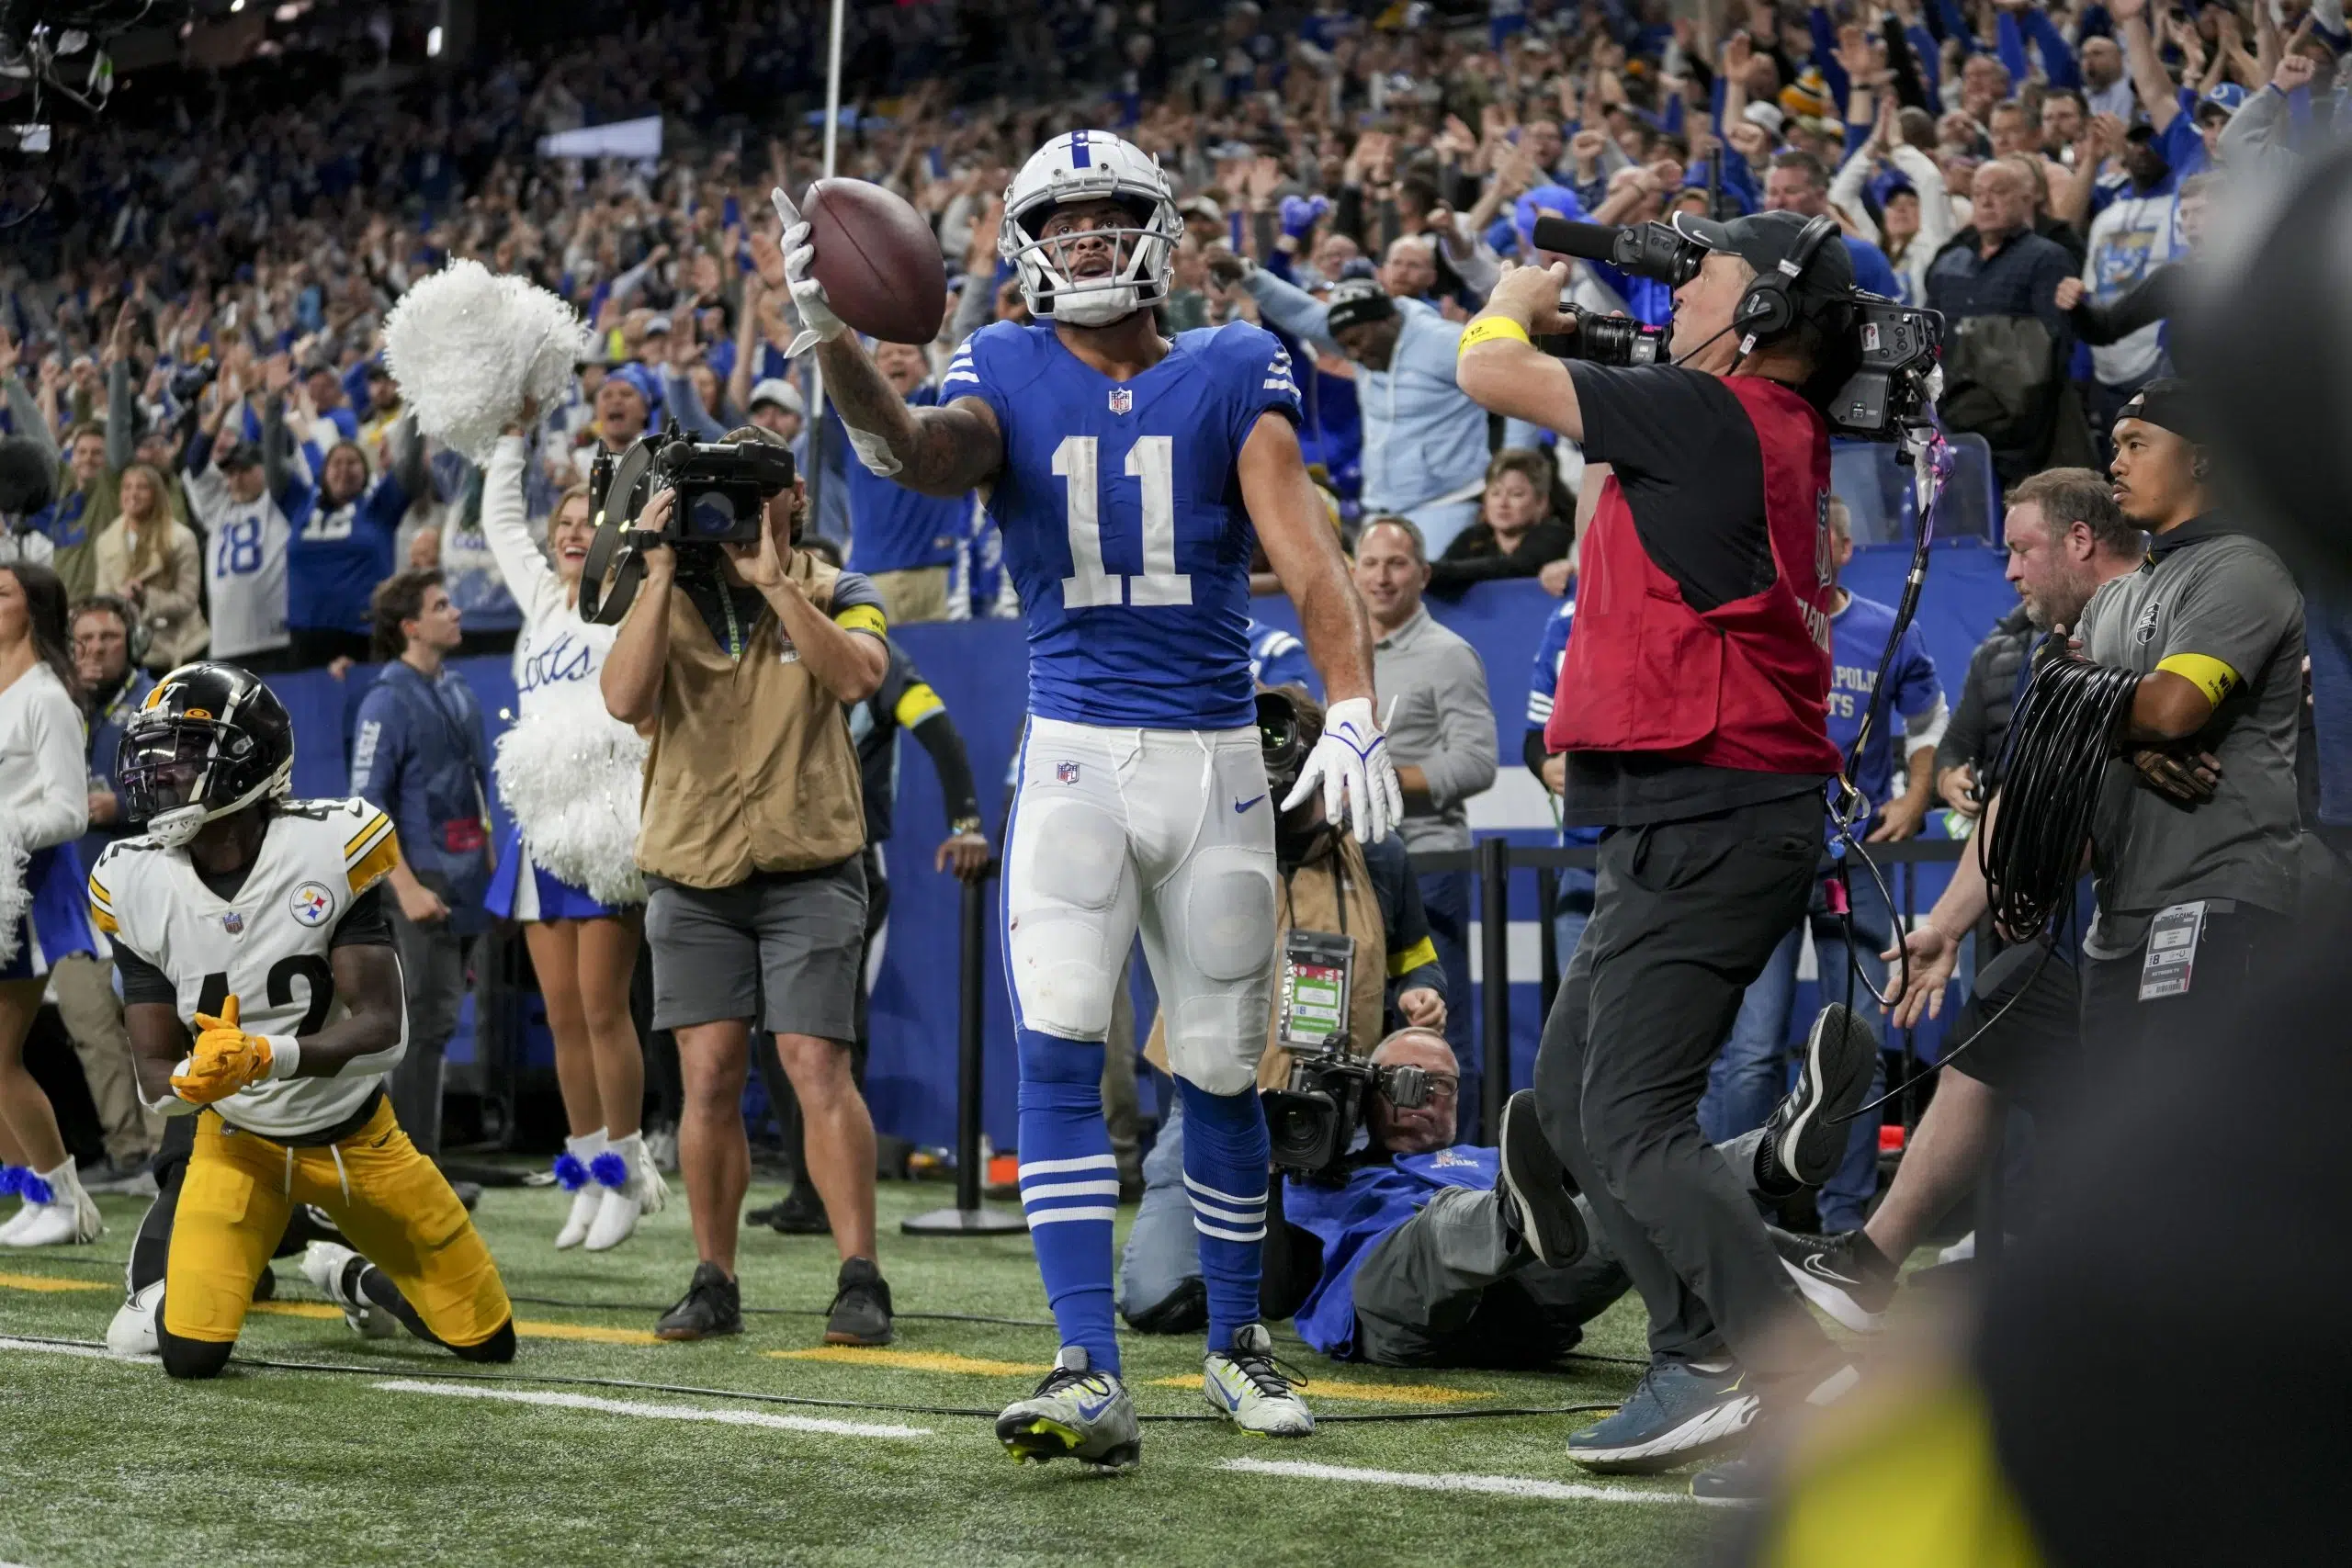 PHOTO GALLERY: Pittsburgh Steelers at Indianapolis Colts